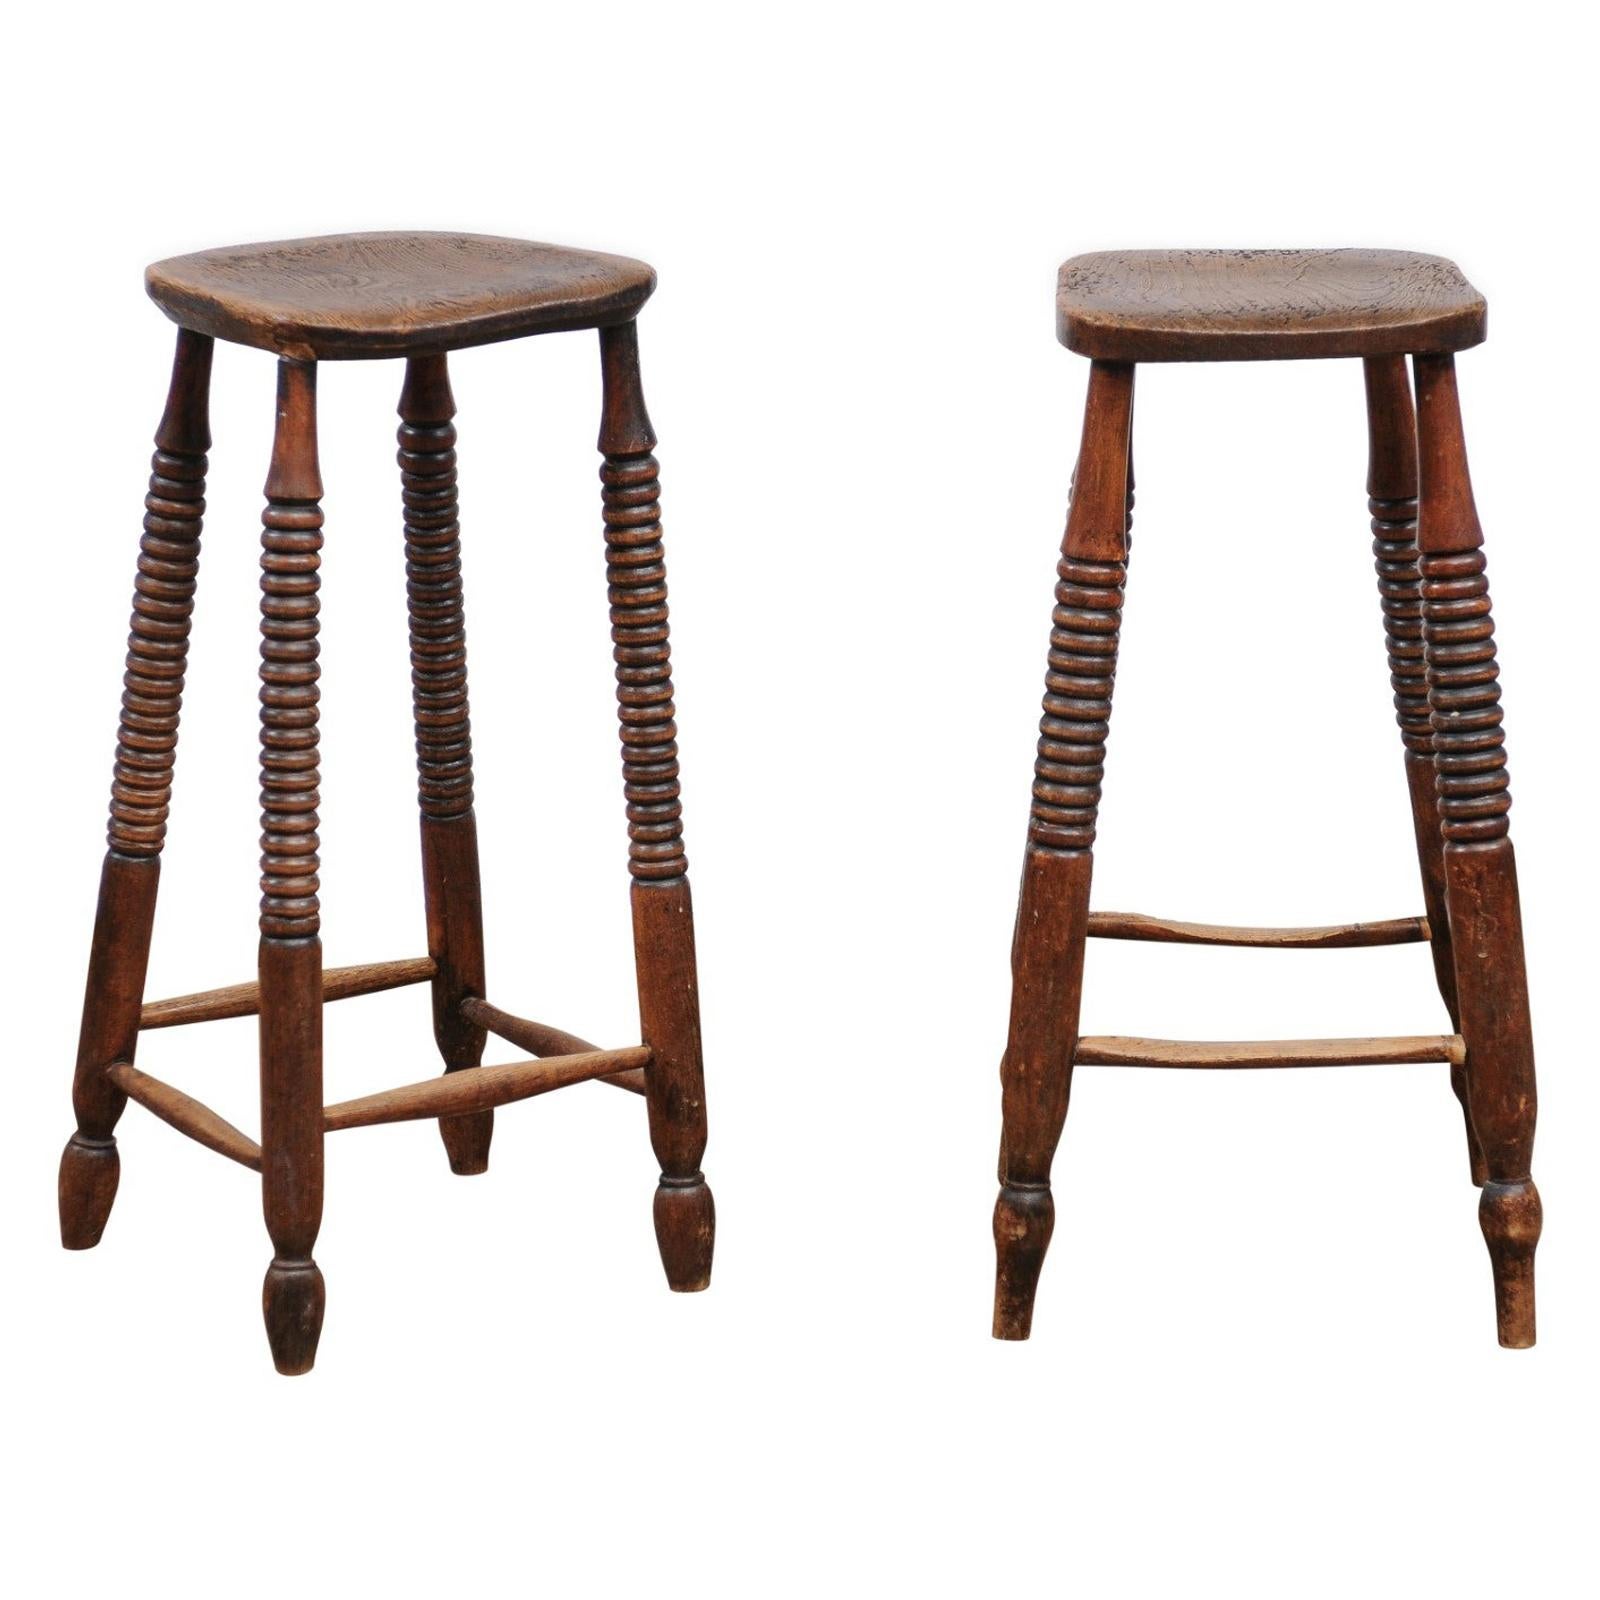 Pair of 1870s French Wooden Bar Stools with Spool Legs and Weathered Patina